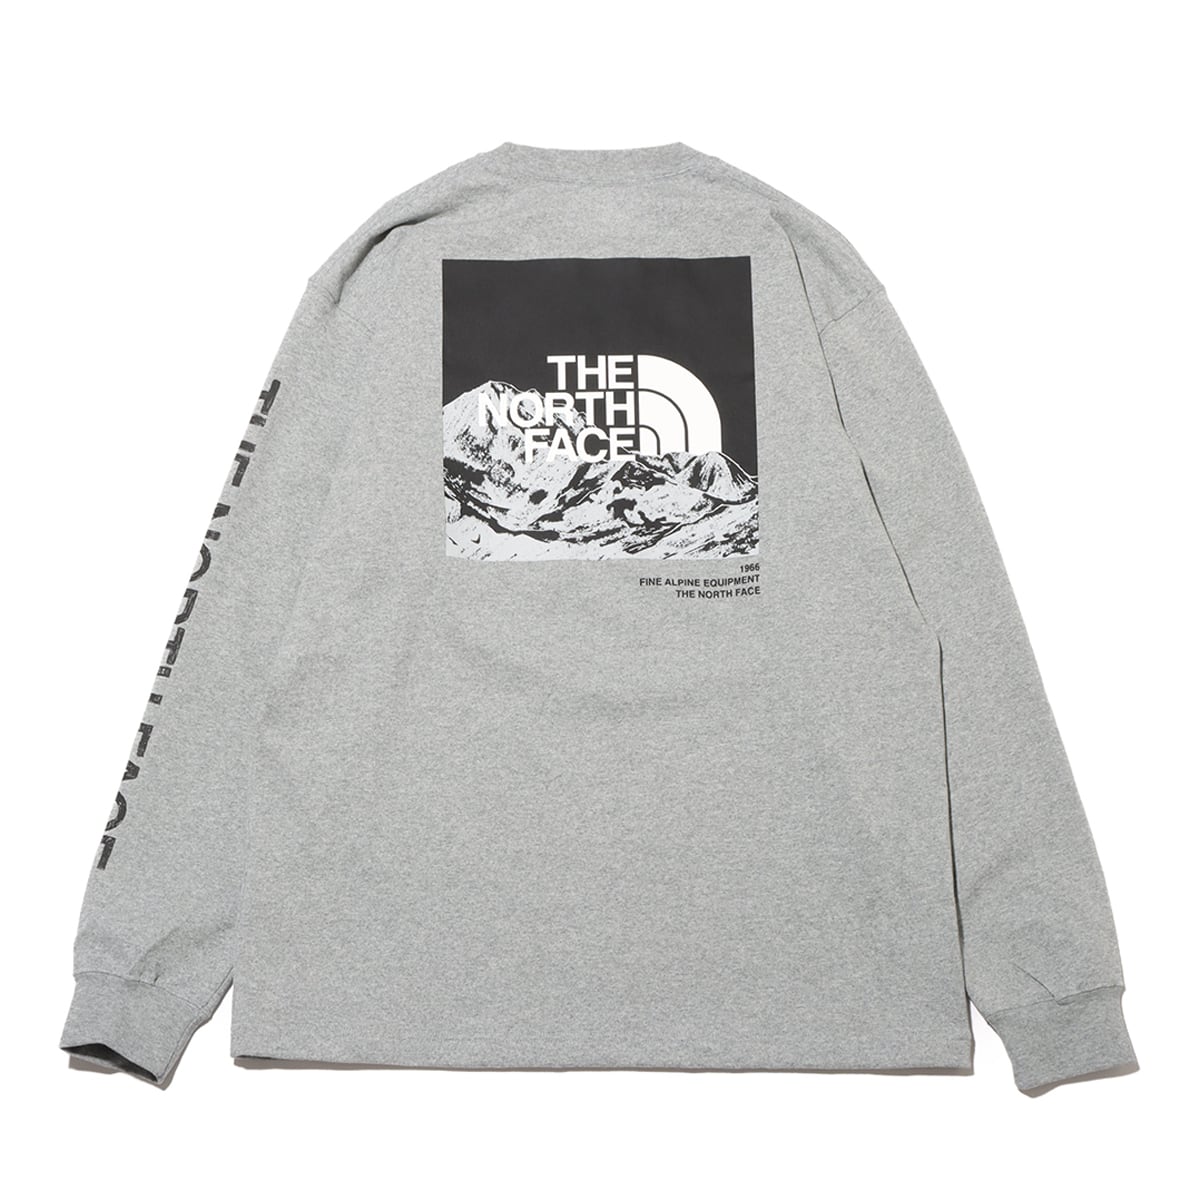 THE NORTH FACE L/S Sleeve Graphic Tee ミックスグレー 24SS-I